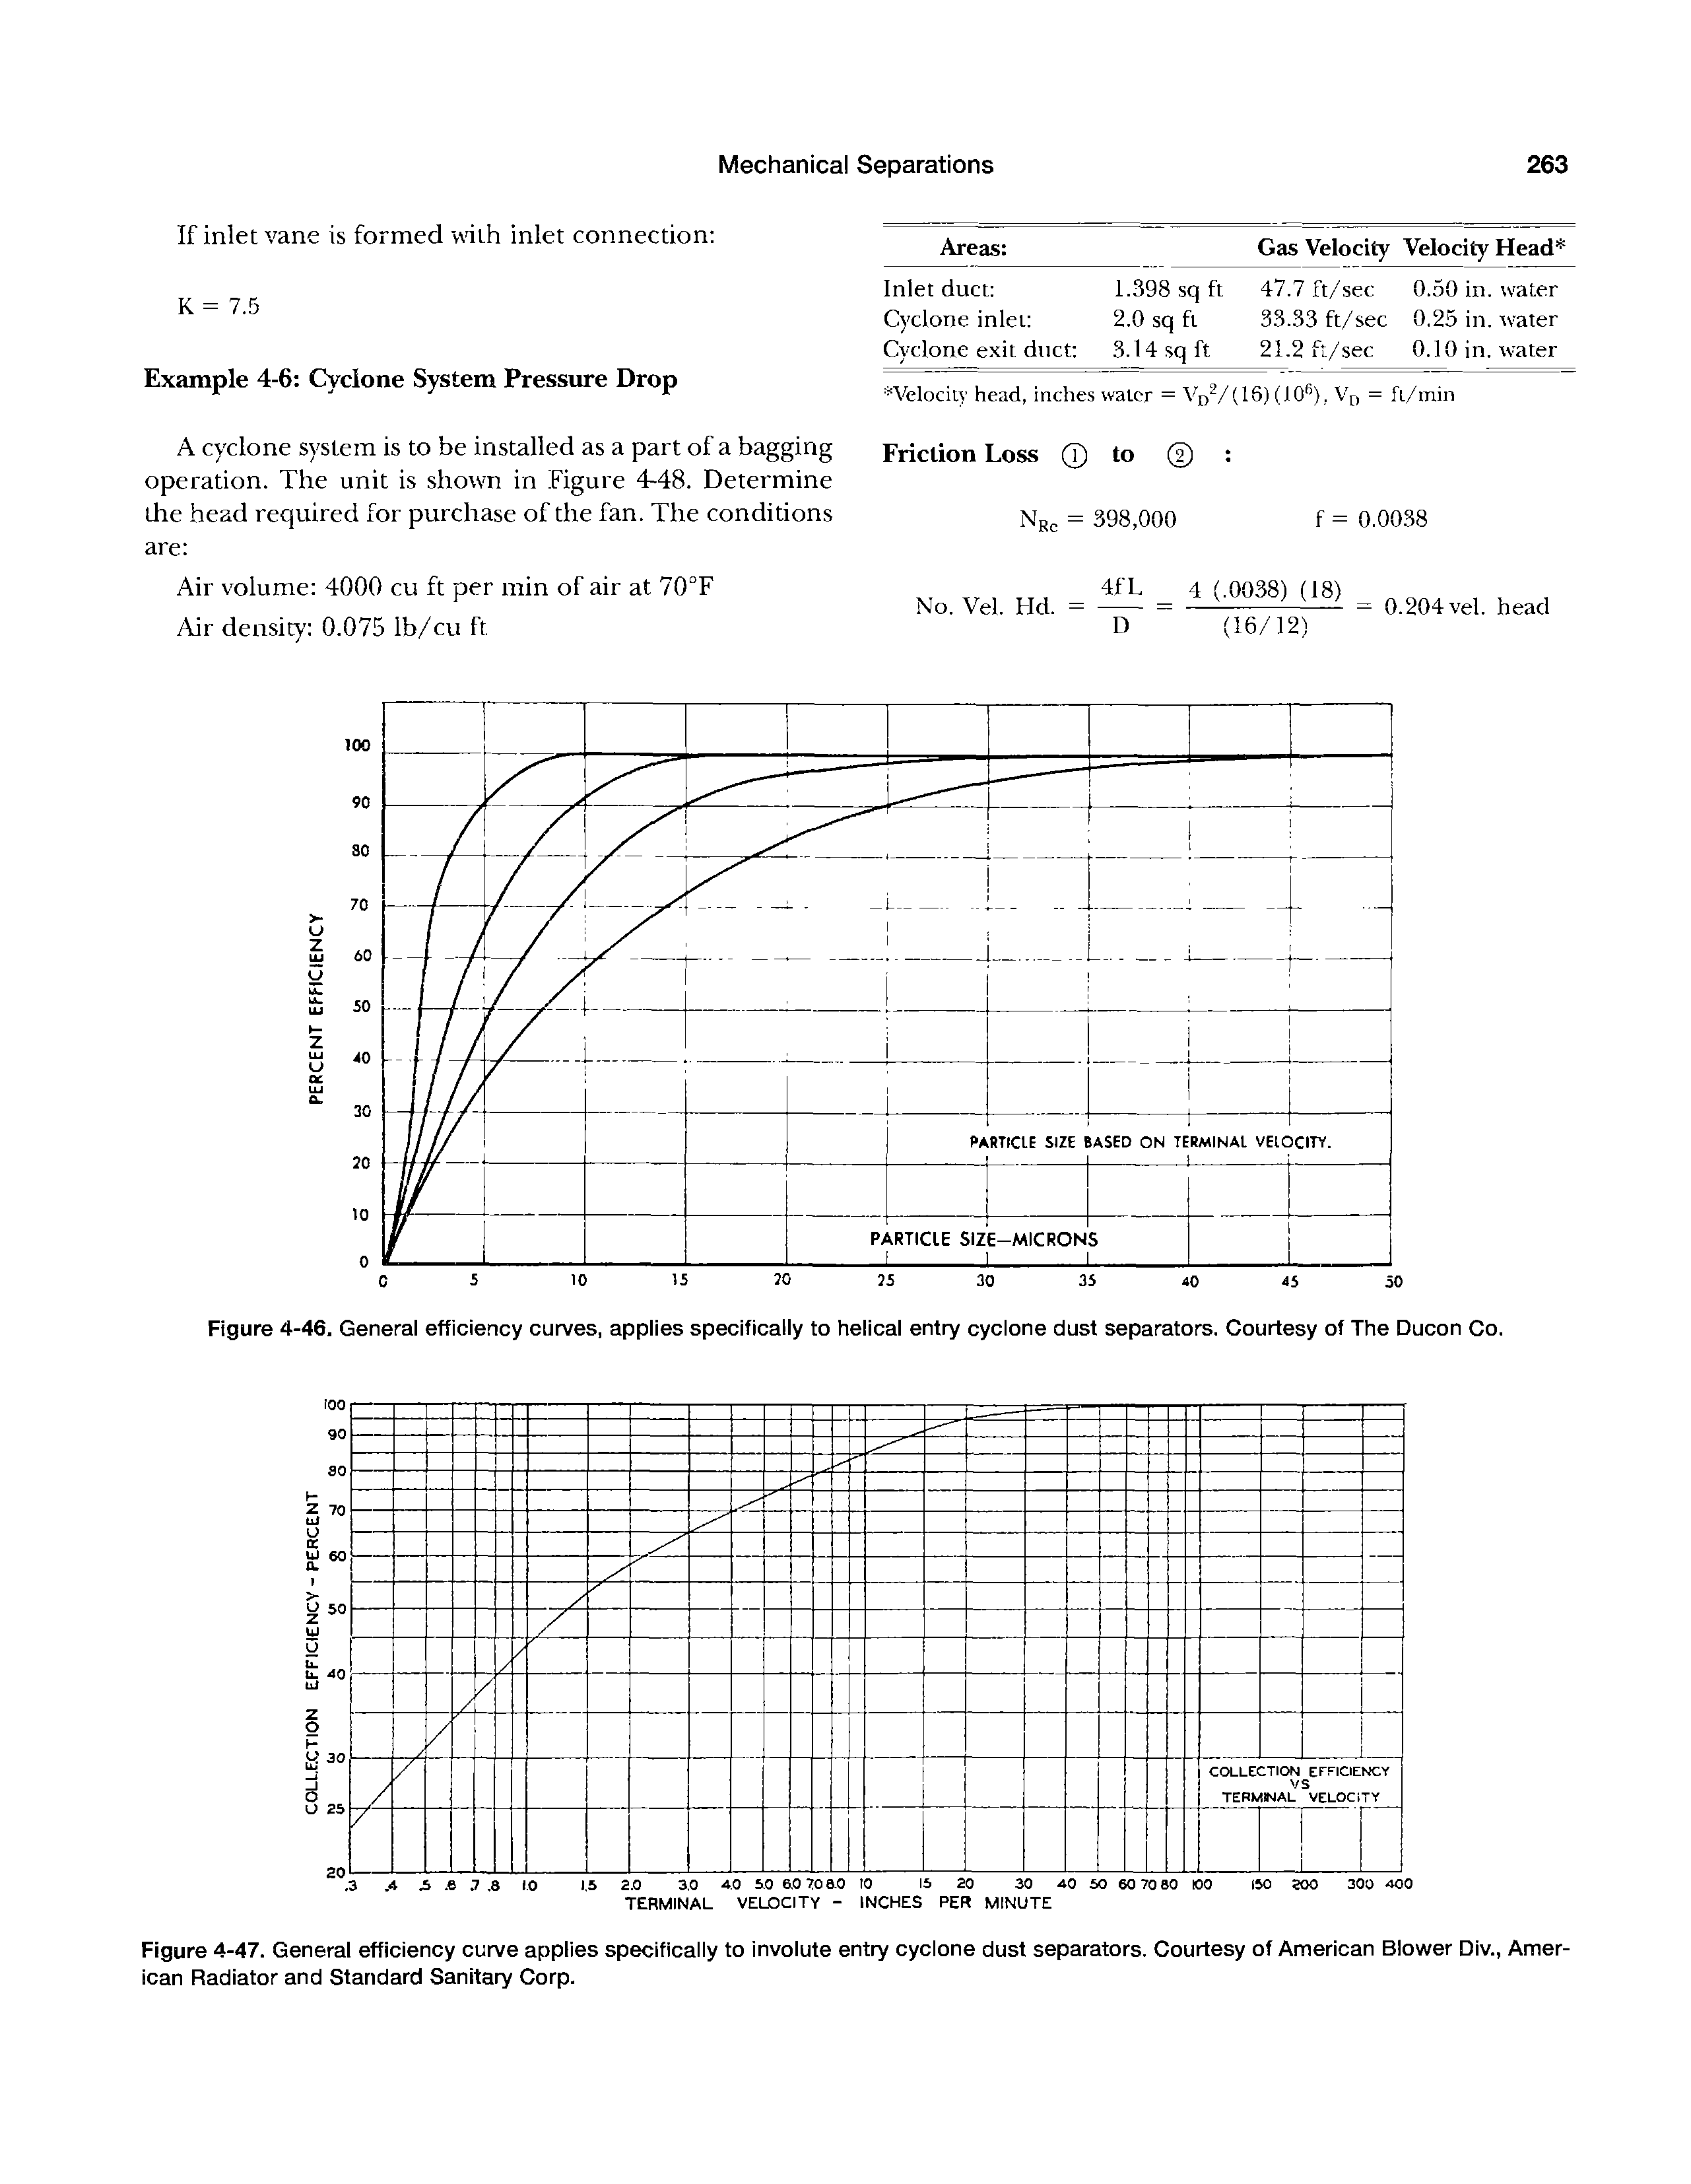 Figure 4-47. General efficiency curve applies specifically to involute entry cyclone dust separators. Courtesy of American Blow/er Div., American Radiator and Standard Sanitary Corp.